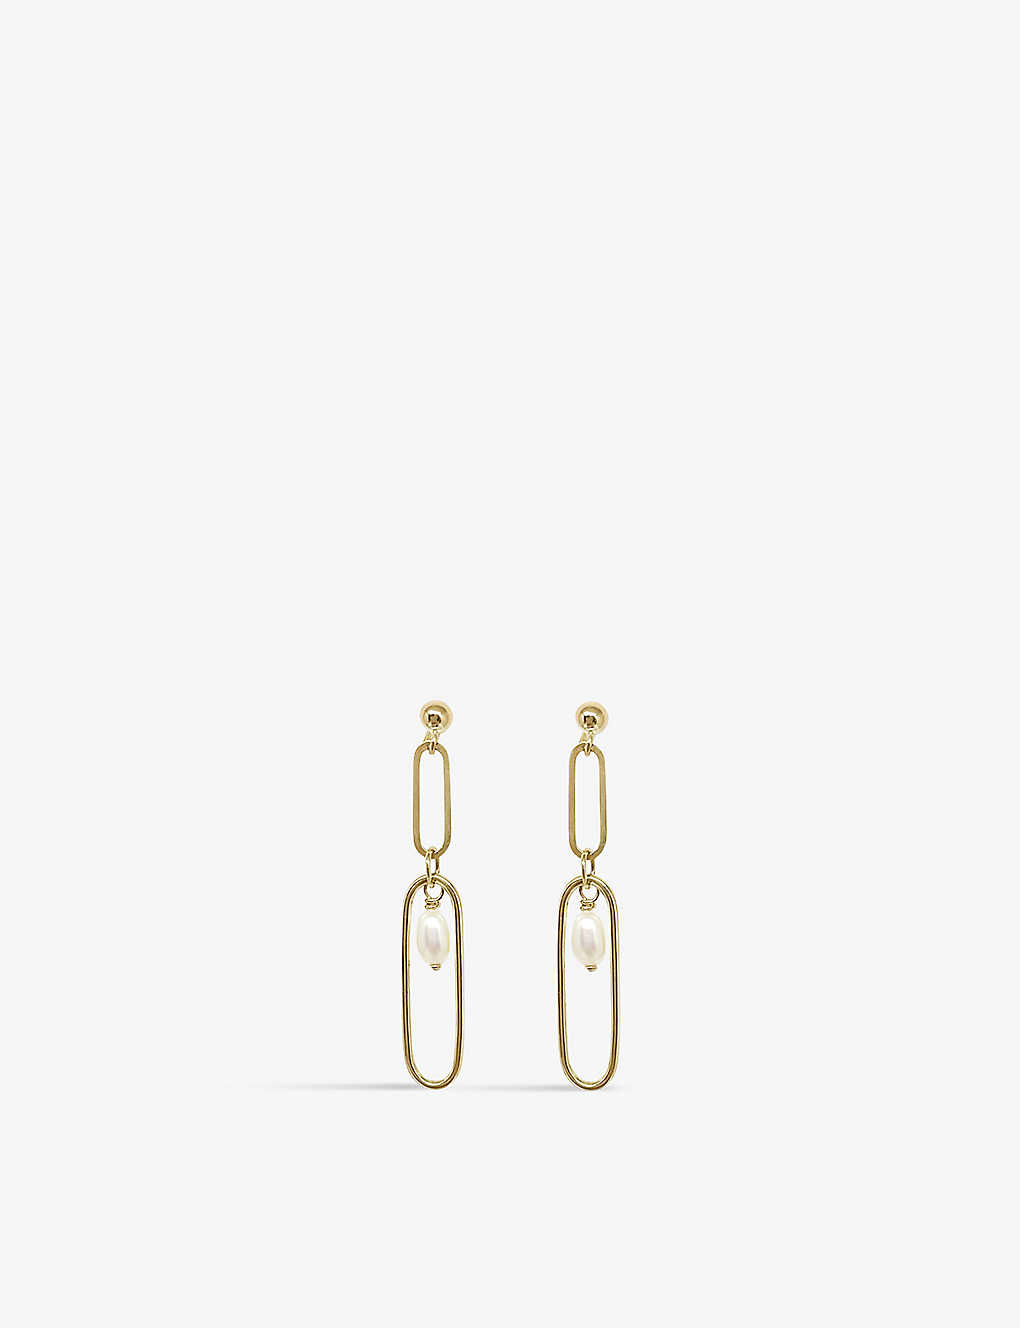 The Alkemistry Womens Yellow Gold Poppy Finch Long Link 14ct-yellow Gold And Pearl Drop Earrings